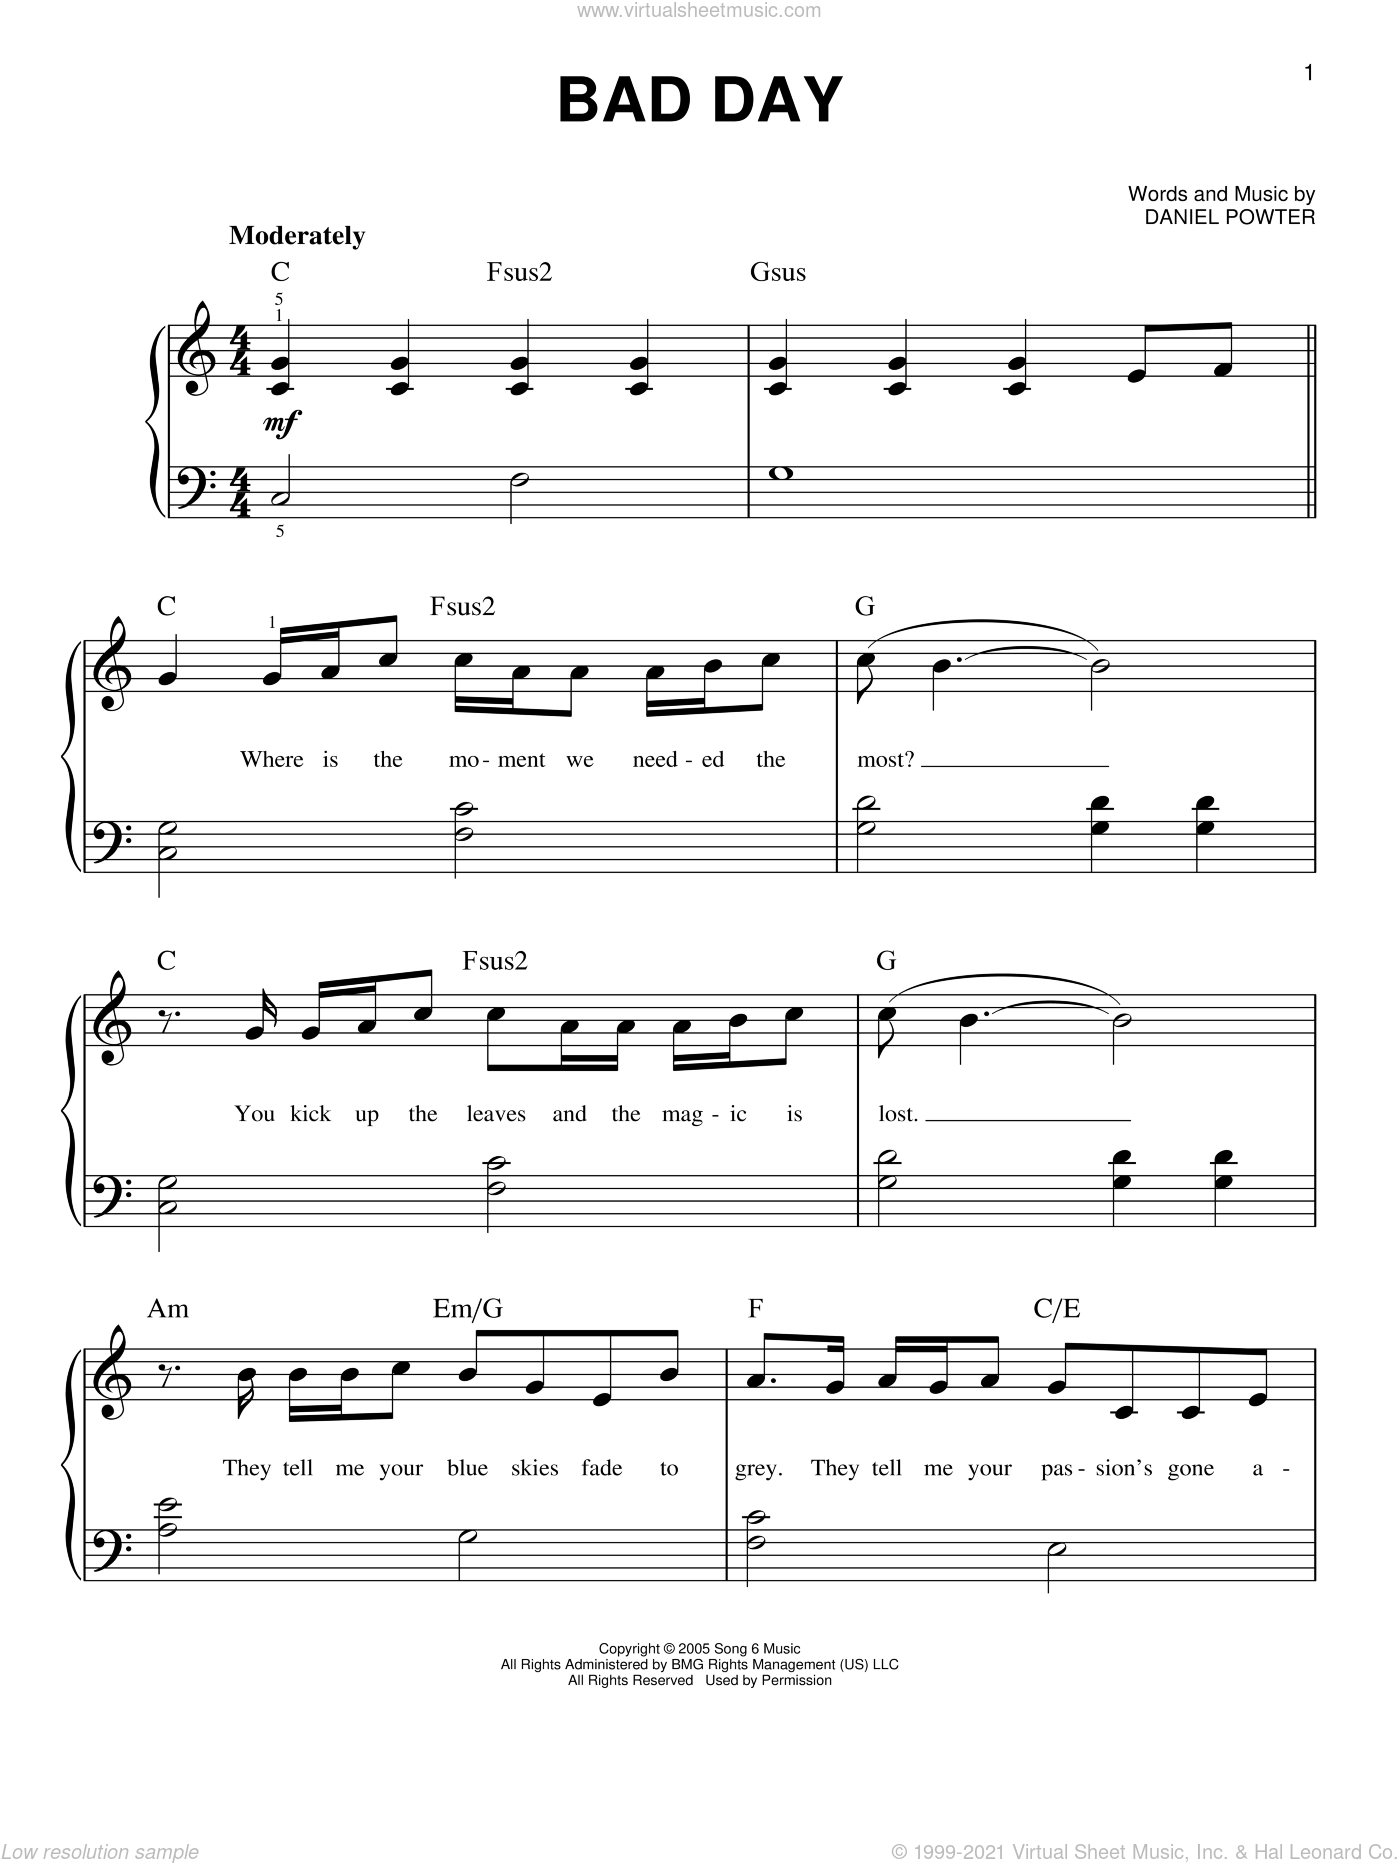 https://cdn3.virtualsheetmusic.com/images/first_pages/HL/HL-30807First_BIG_2.png